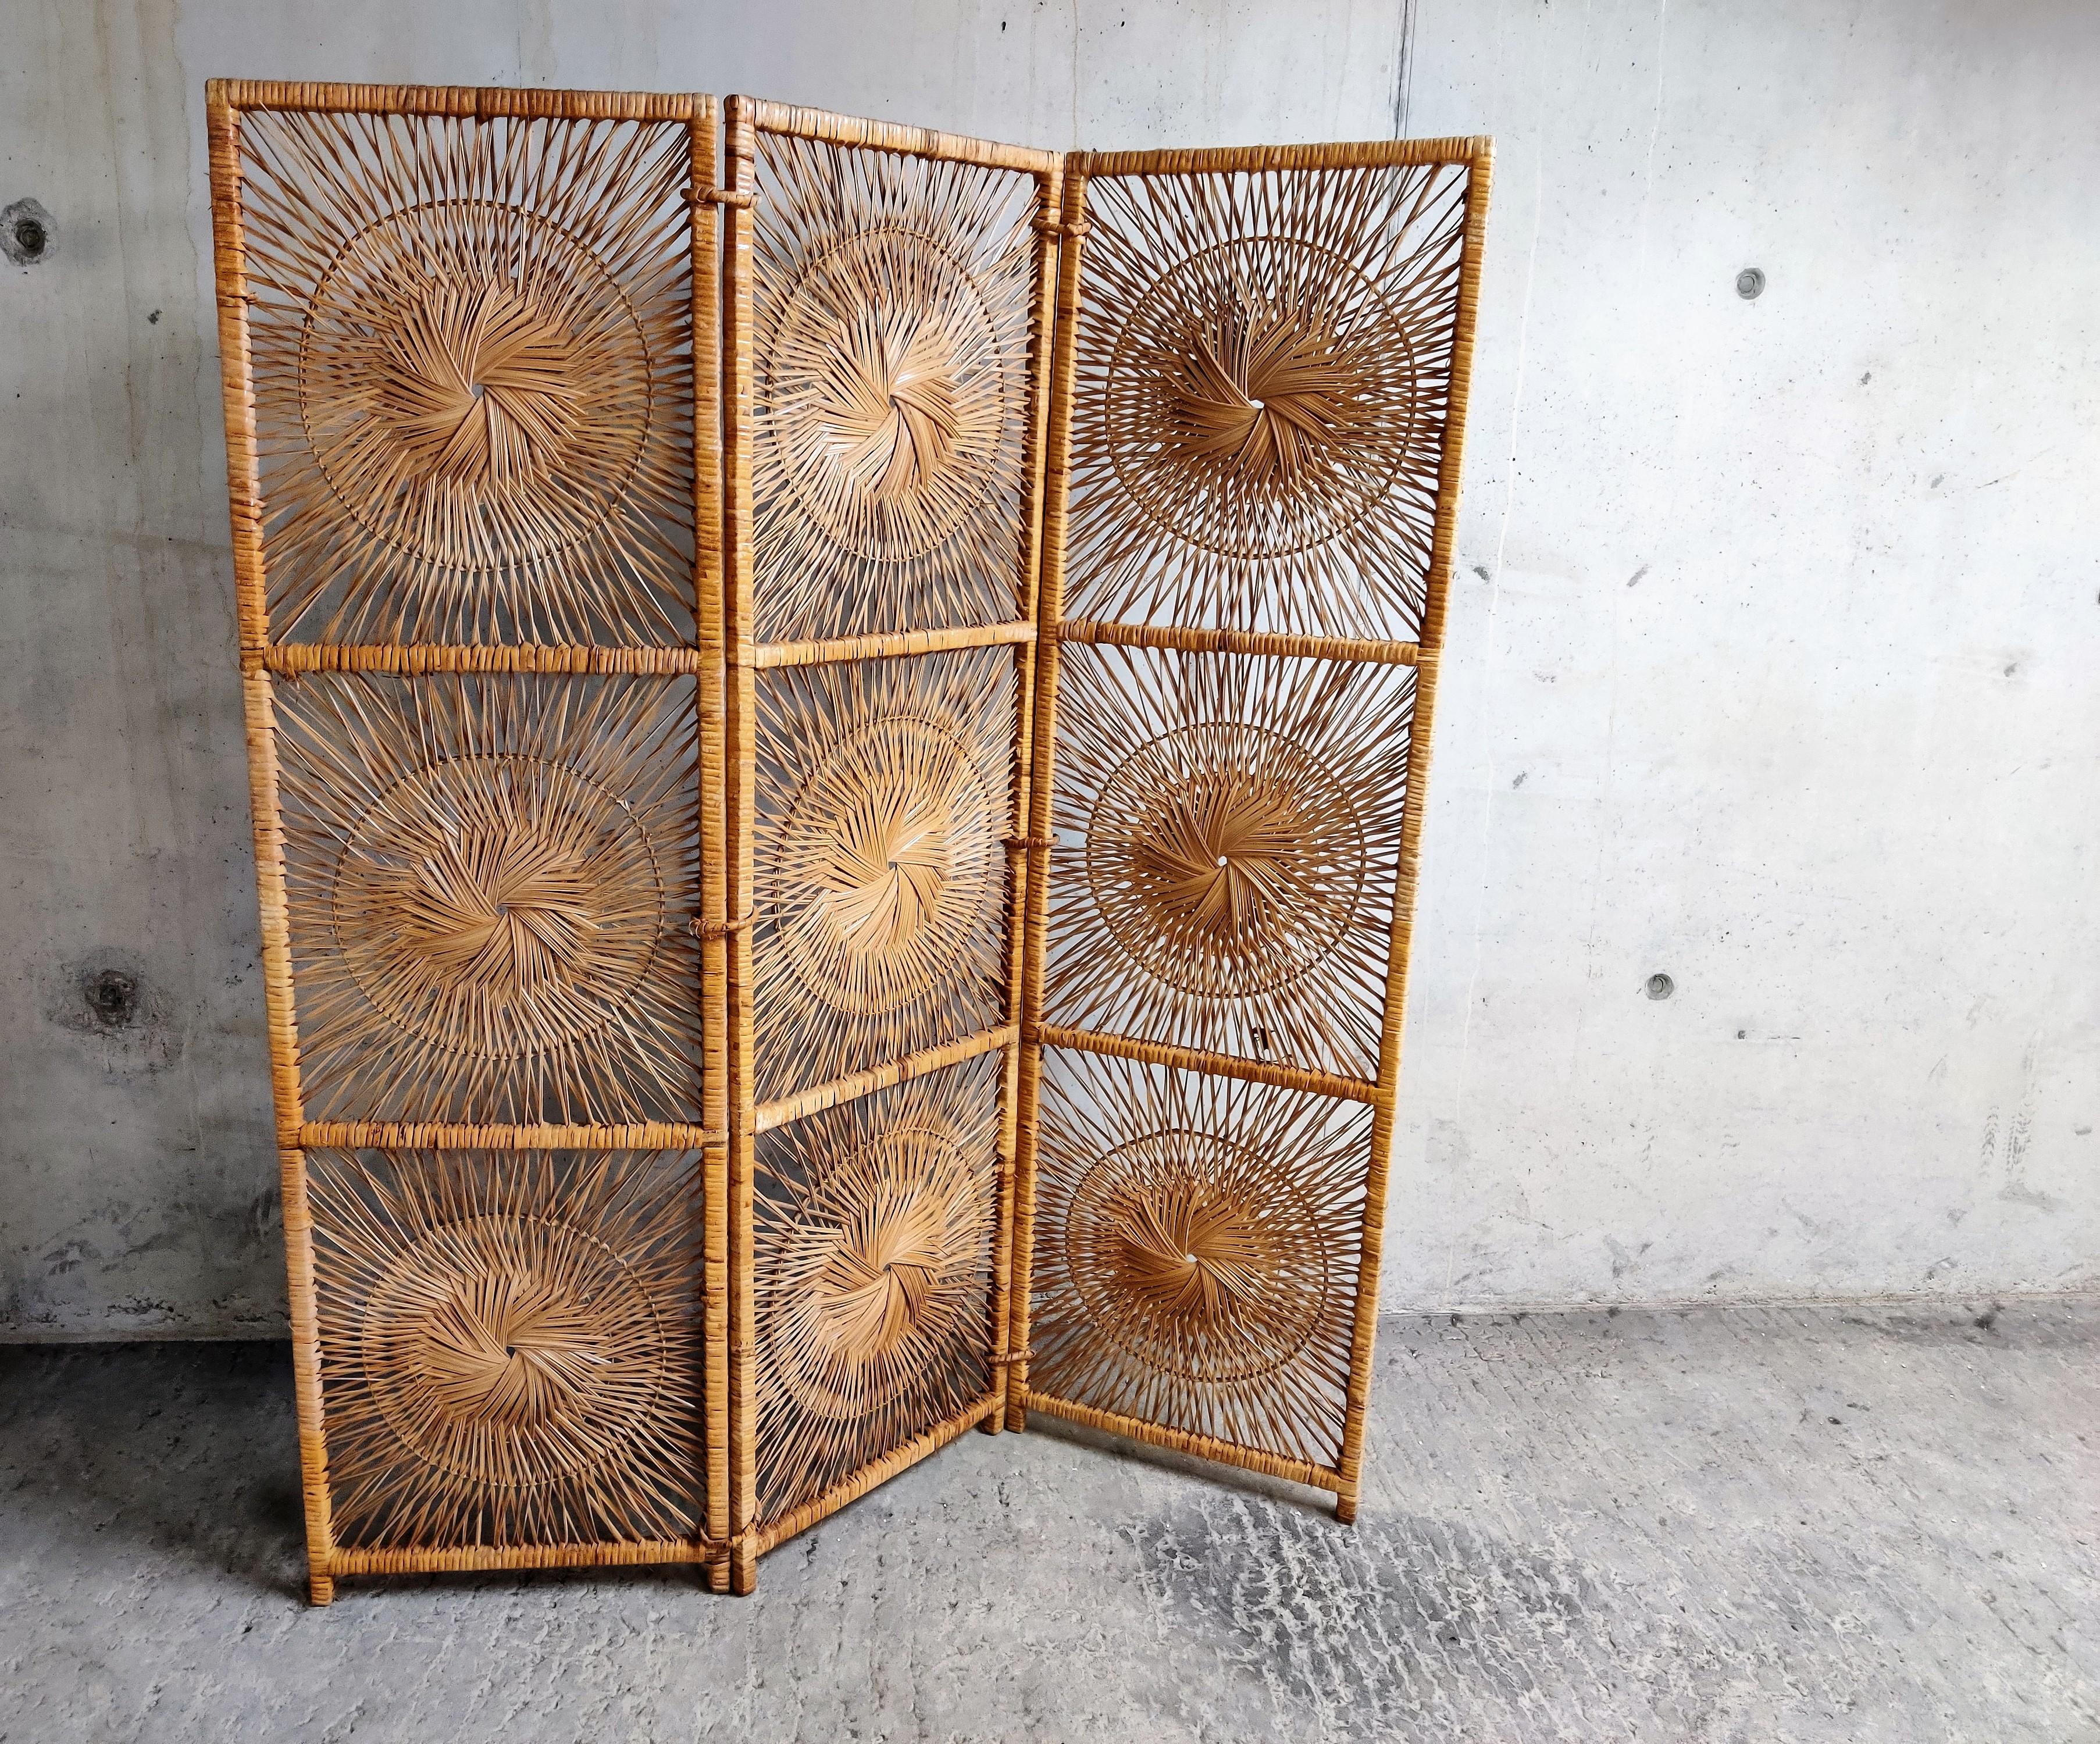 Beautiful midcentury 'sunburst' rattan room divider/folding screen.

This piece can really make a room and is very decorative.

Beautiful original condition with some charming wear.

1960s, Netherlands

Measures: Height 177 cm/69.68